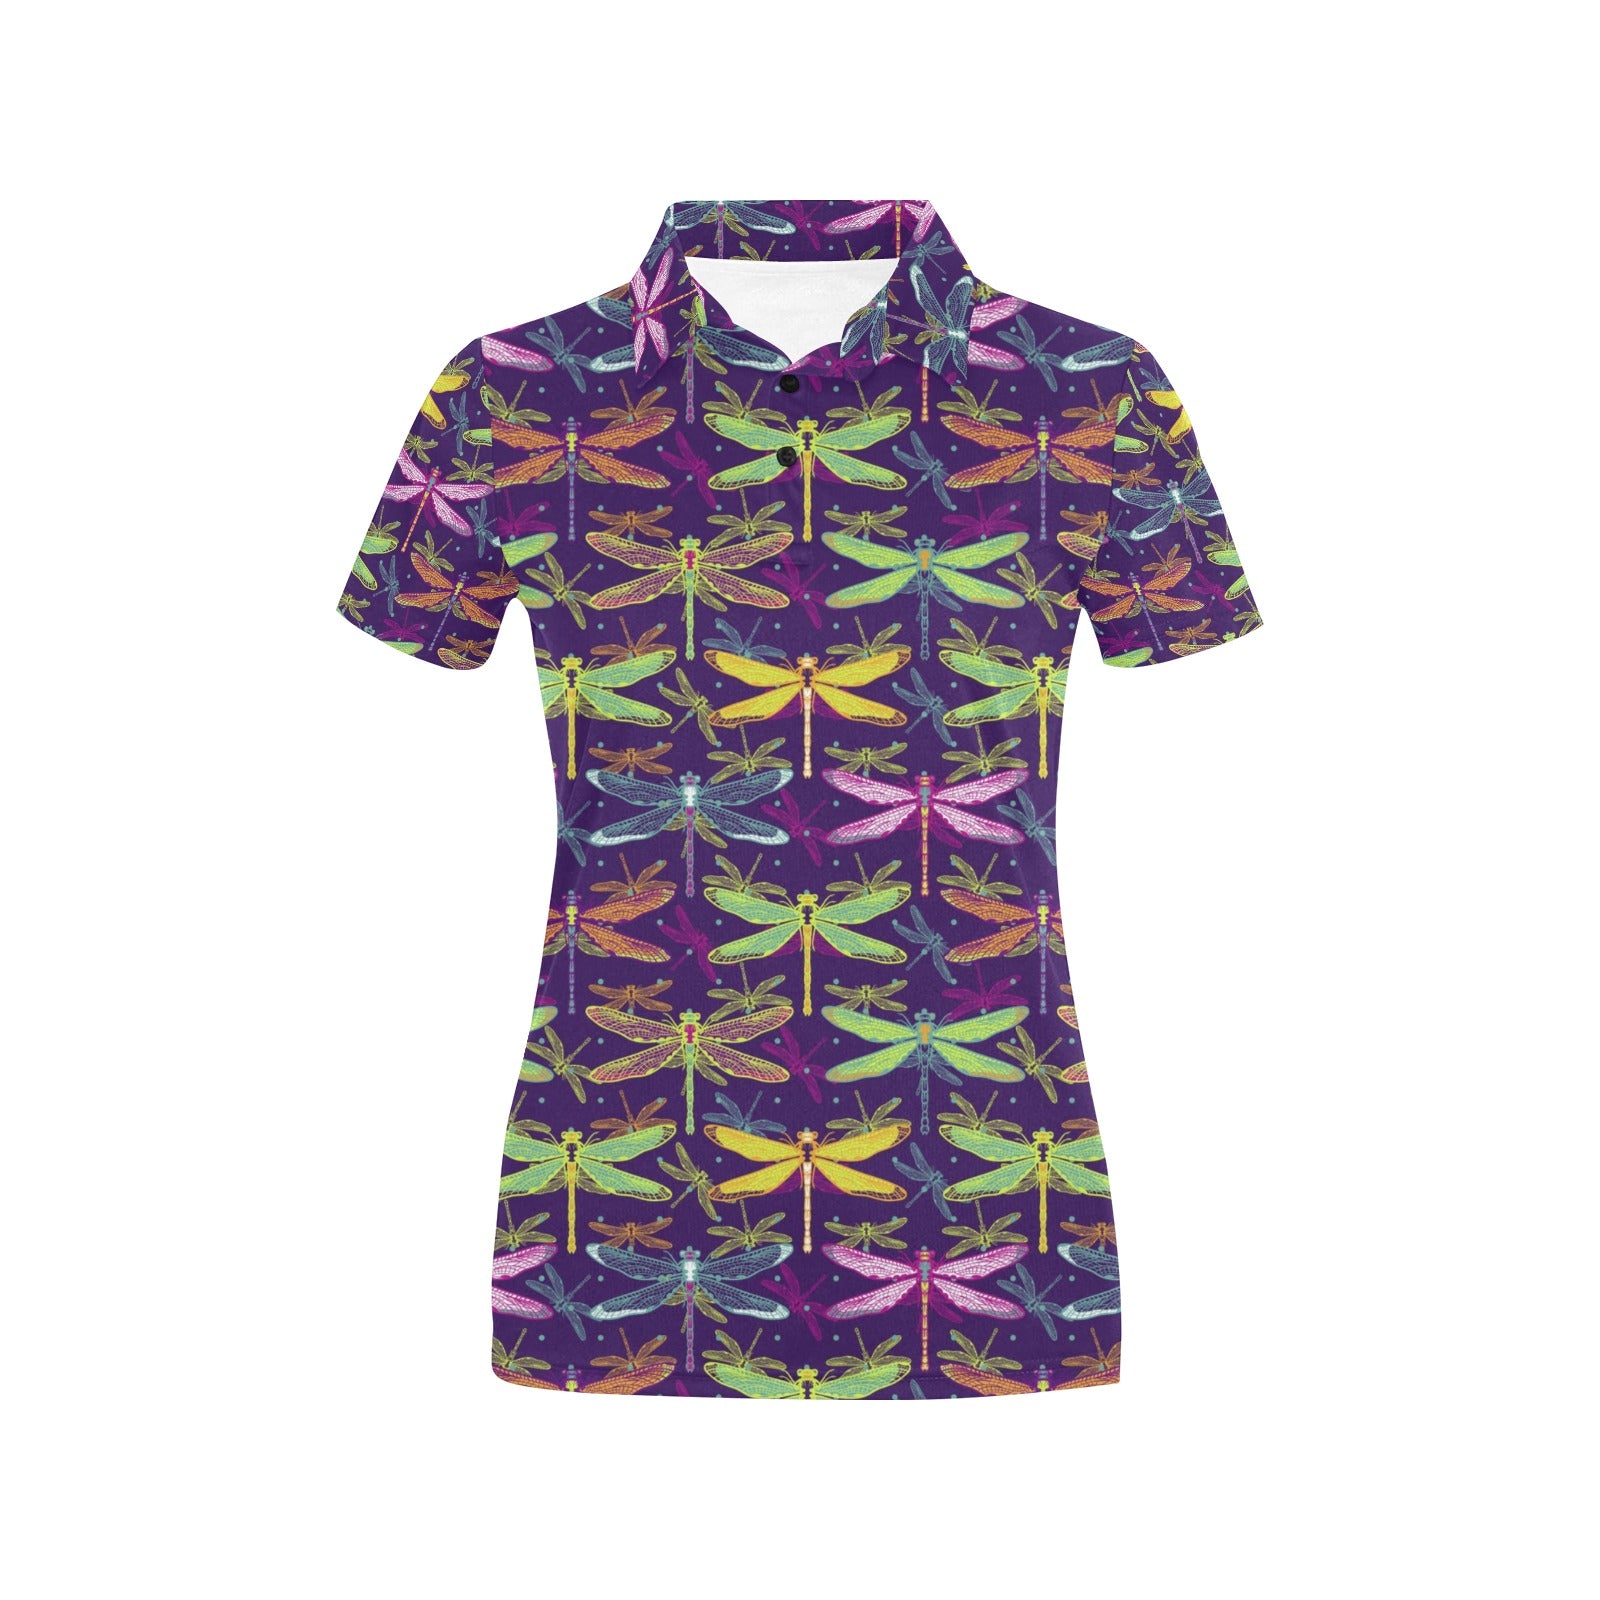 Dragonfly Neon Color Print Pattern Women's Polo Shirt